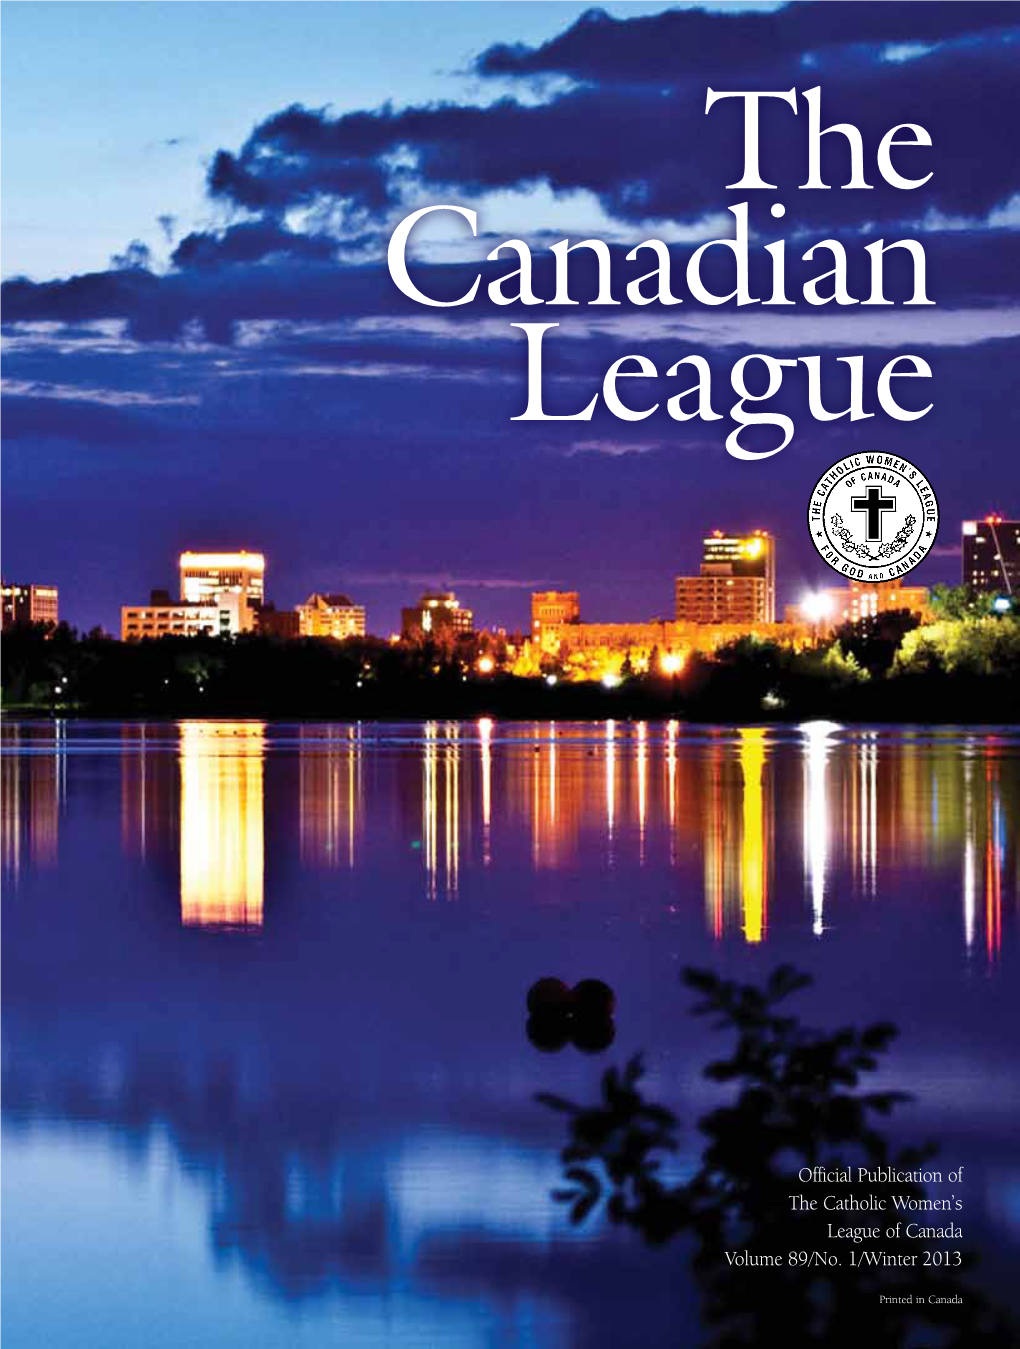 Official Publication of the Catholic Women's League of Canada